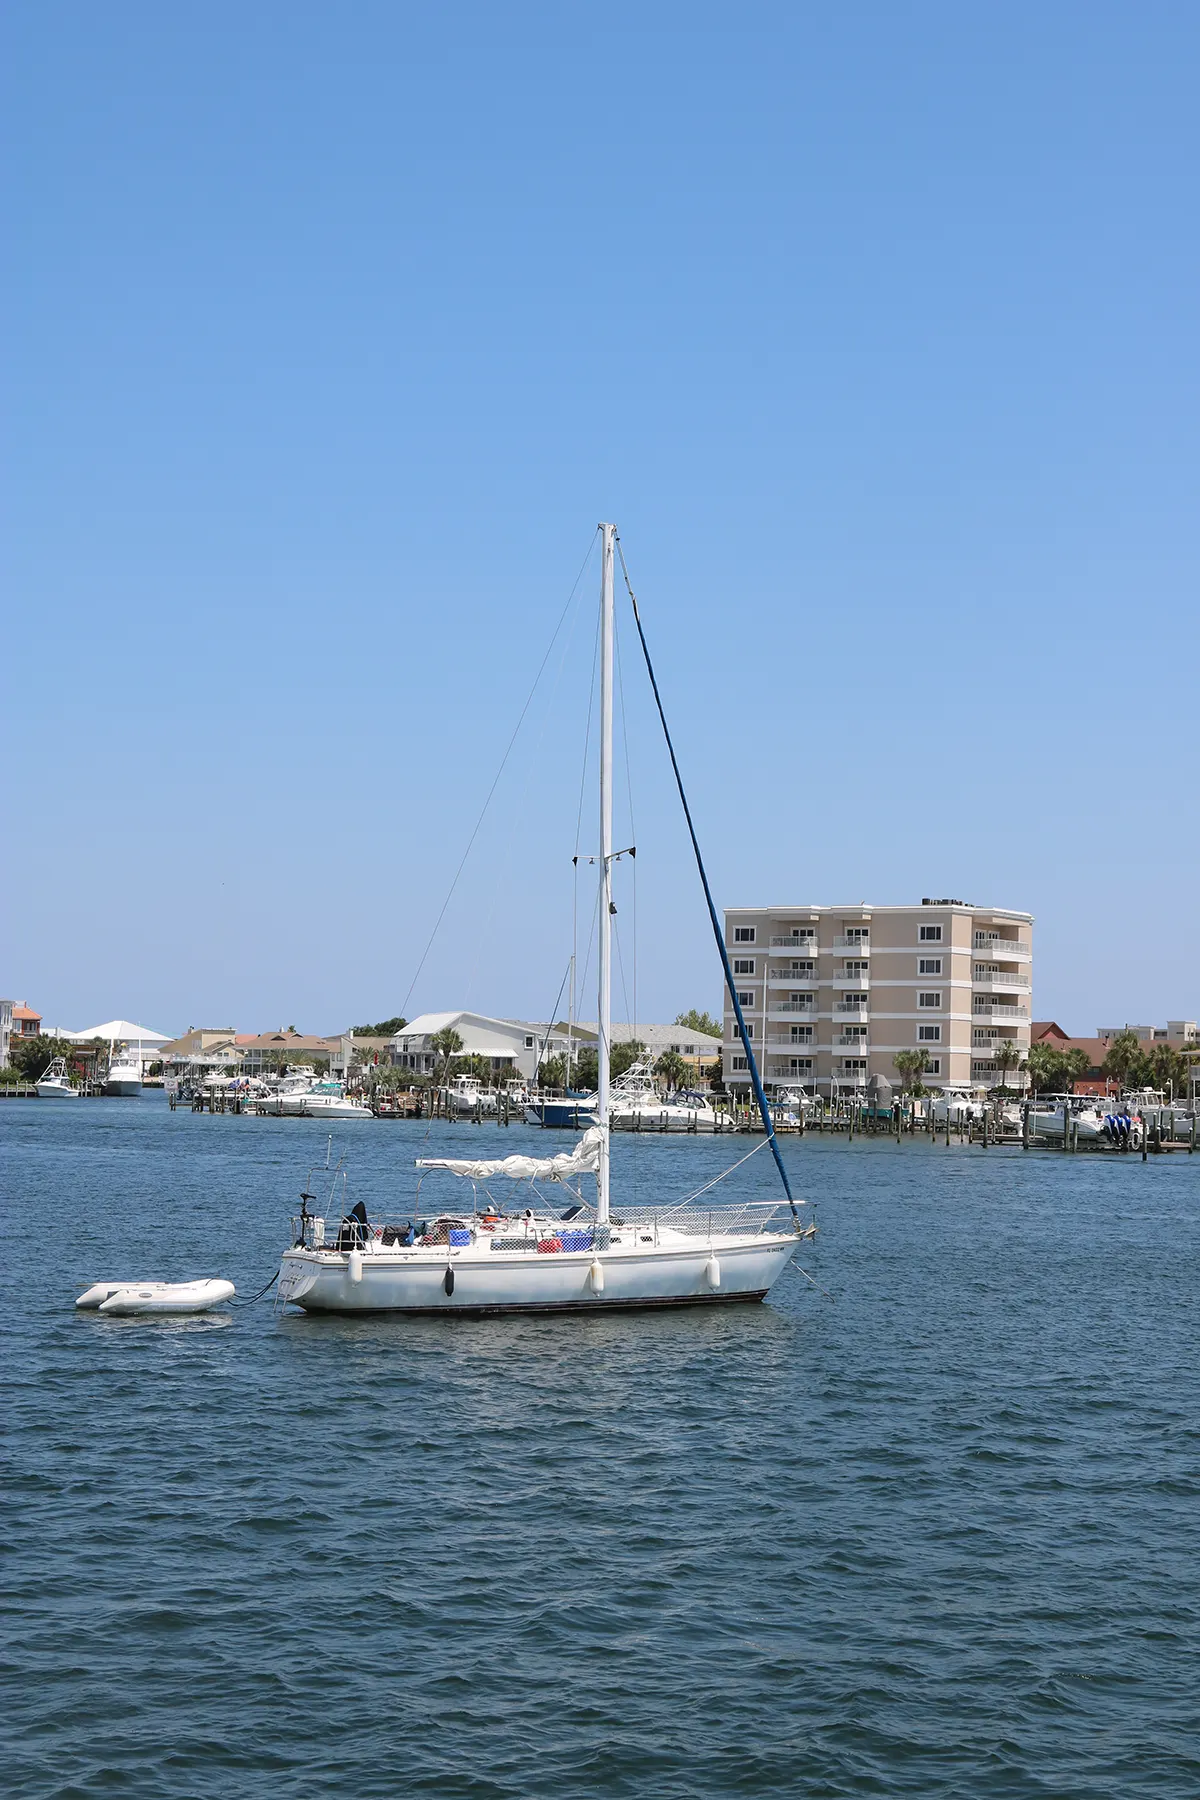 Boat in the Water | Air Conditioning Repair in Destin | Emerald Coast Air Conditioning and Heating | AirConditioningRepairPensacola.com